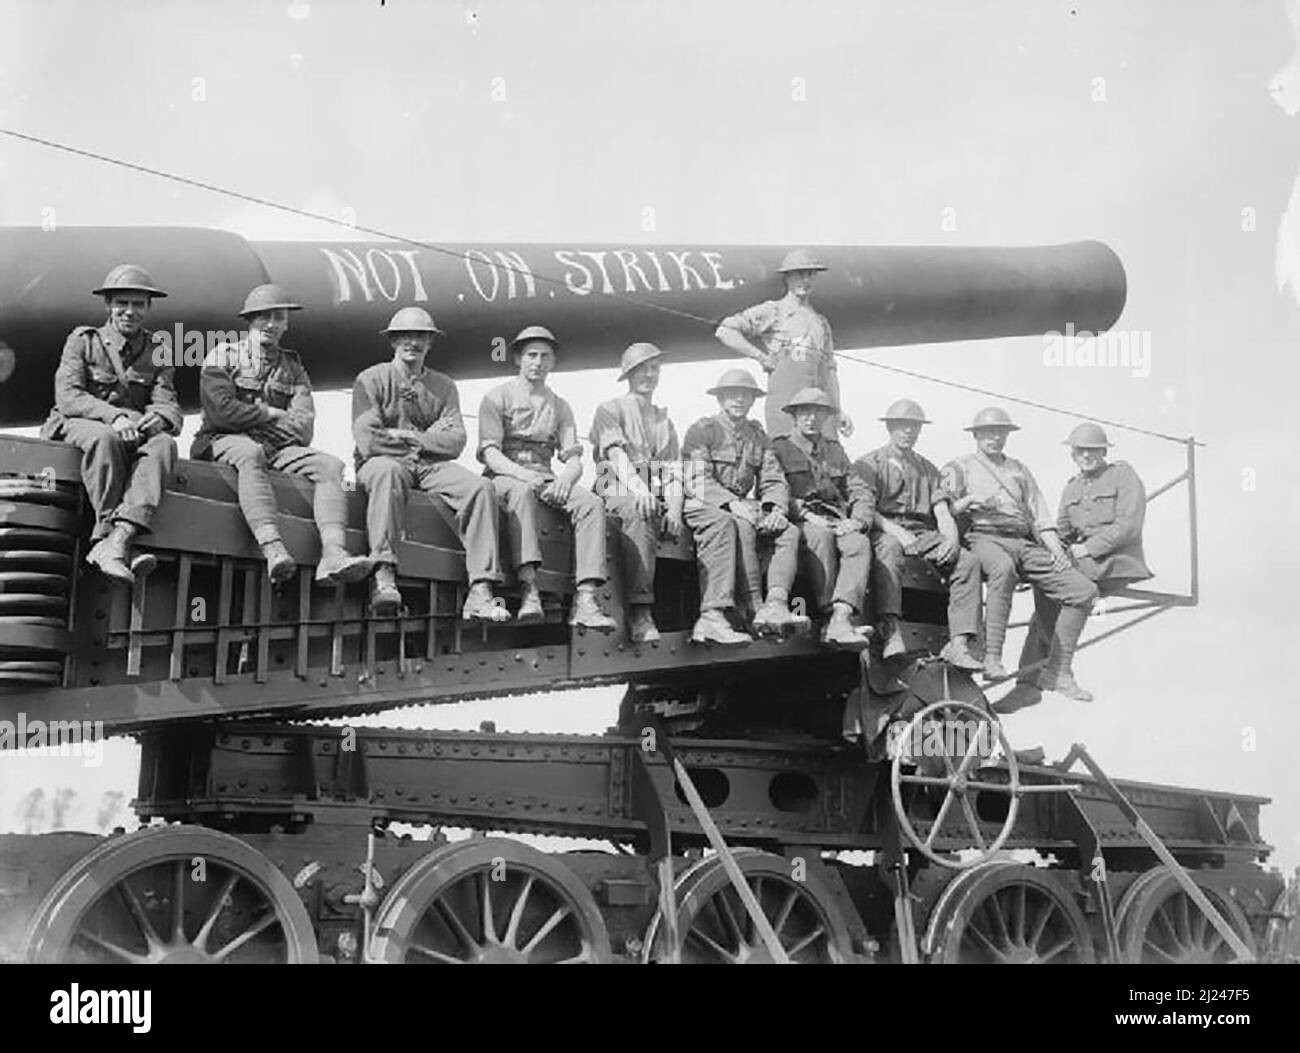 1917 Battle of Langemarck 16-18 August: 12 inch railway gun at Woesten with its crew perched on it and the slogan 'Not on Strike' on the barrel. NOTE : The pattern of the bogie wheels with the frame inside identifies this as a 12 inch Railway Gun on Vickers Mk I mounting. Stock Photo